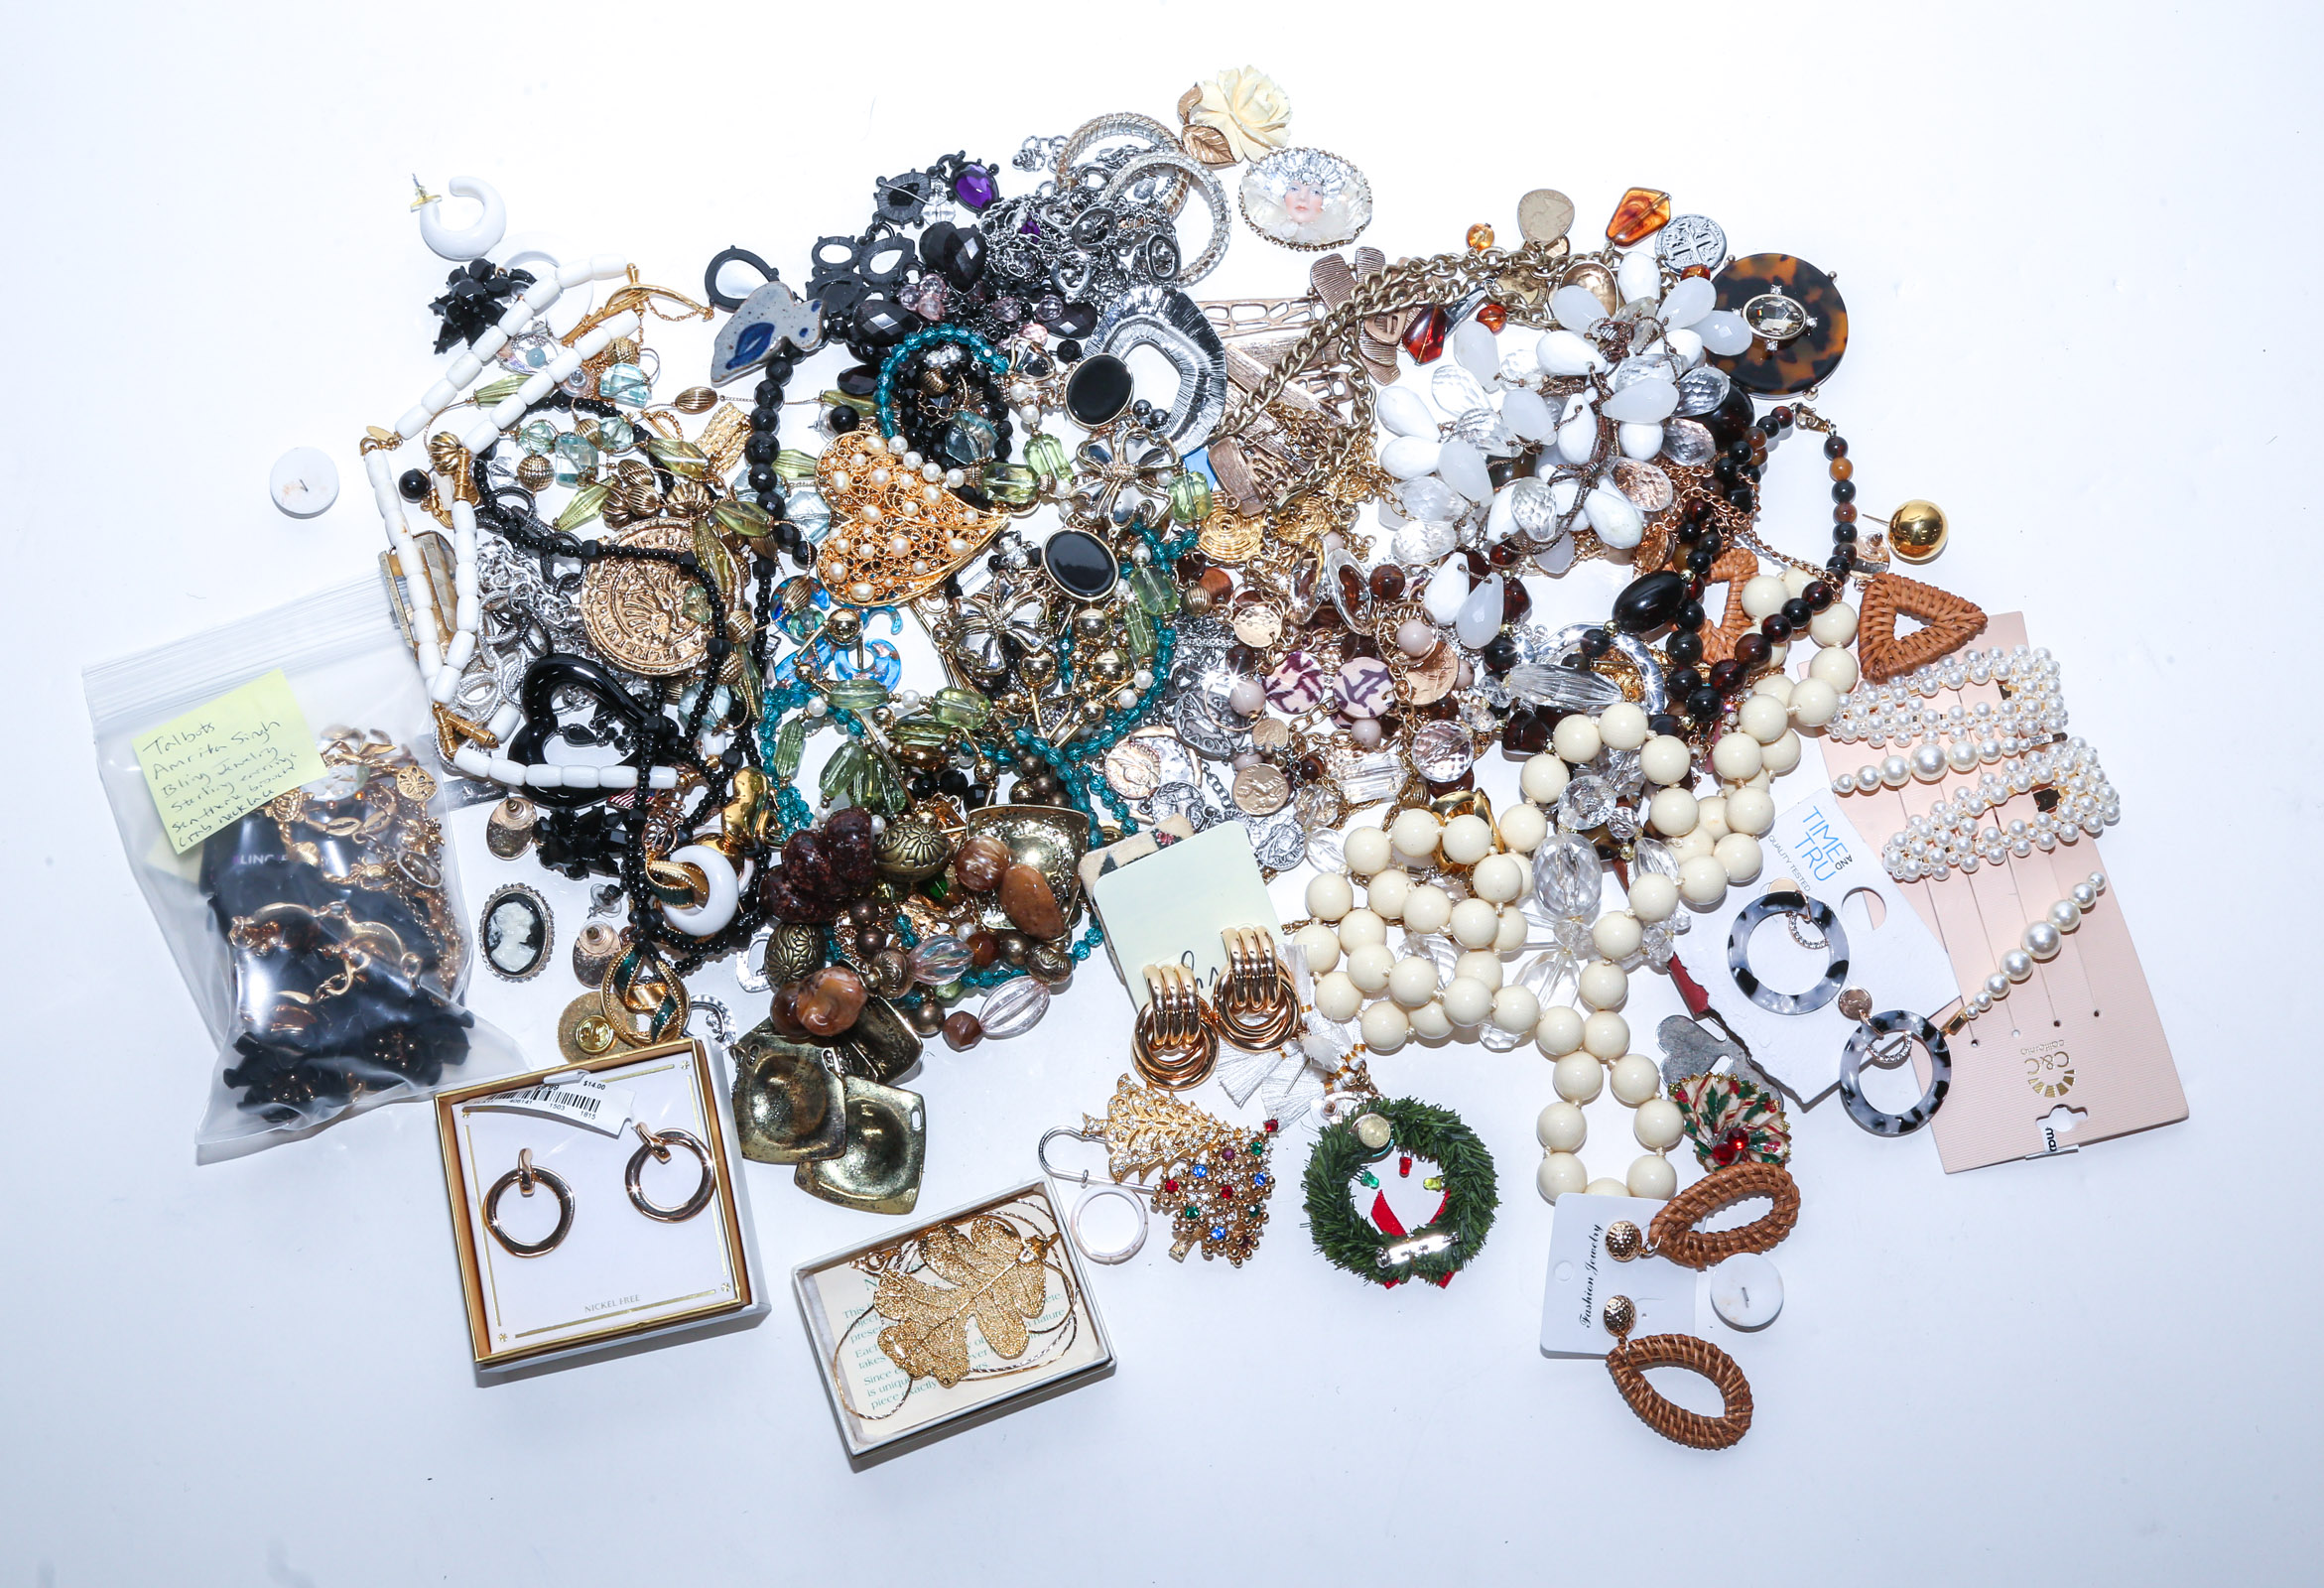 A LARGE COLLECTION OF FASHION JEWELRY